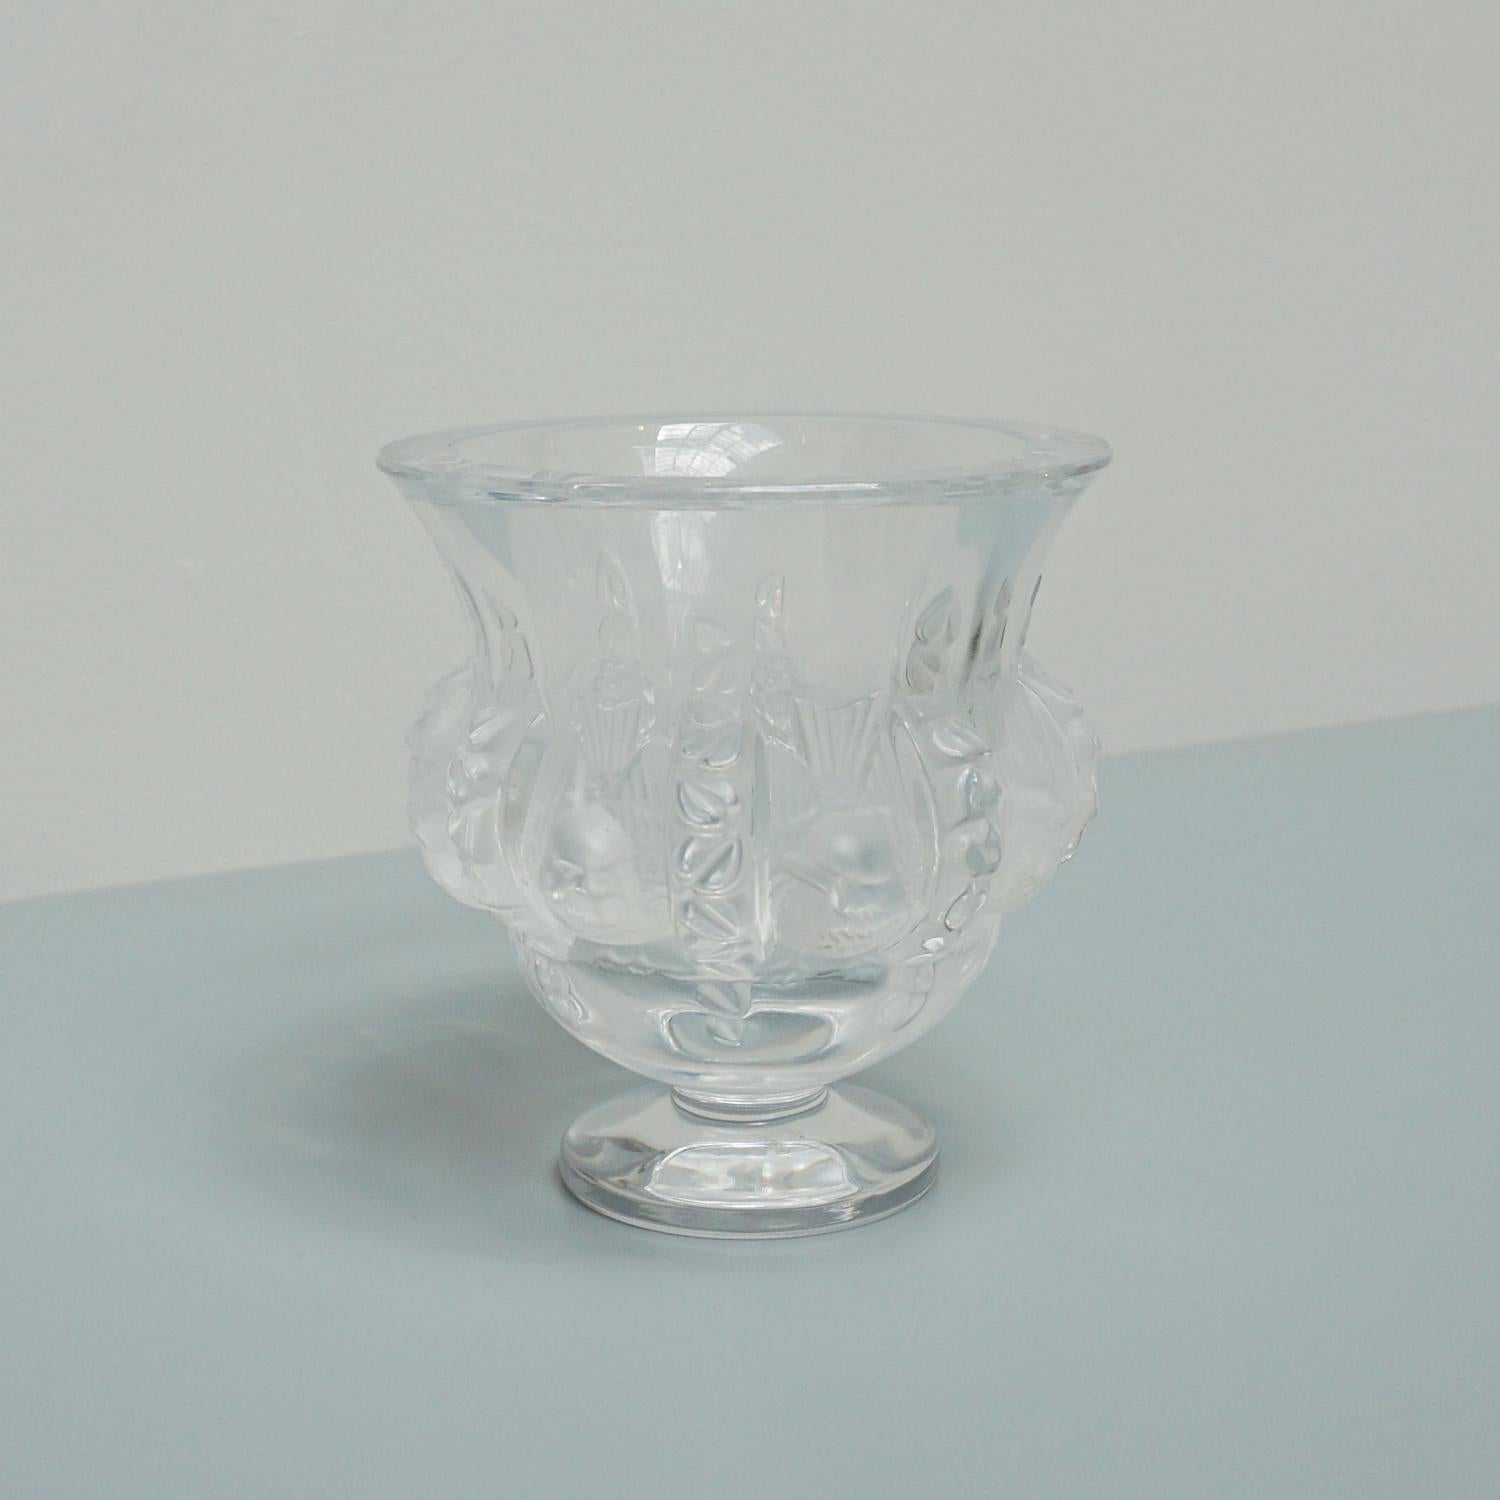 A clear crystal vase with satin finish by Marc Lalique depicting Fauna and Flora. Etched 'Lalique France' to base. Originally designed by Marc Lalique in 1948.

Dimensions: H 12.5cm W 12cm

Origin: France 

Date: Circa 1960

Item Number: 1507231